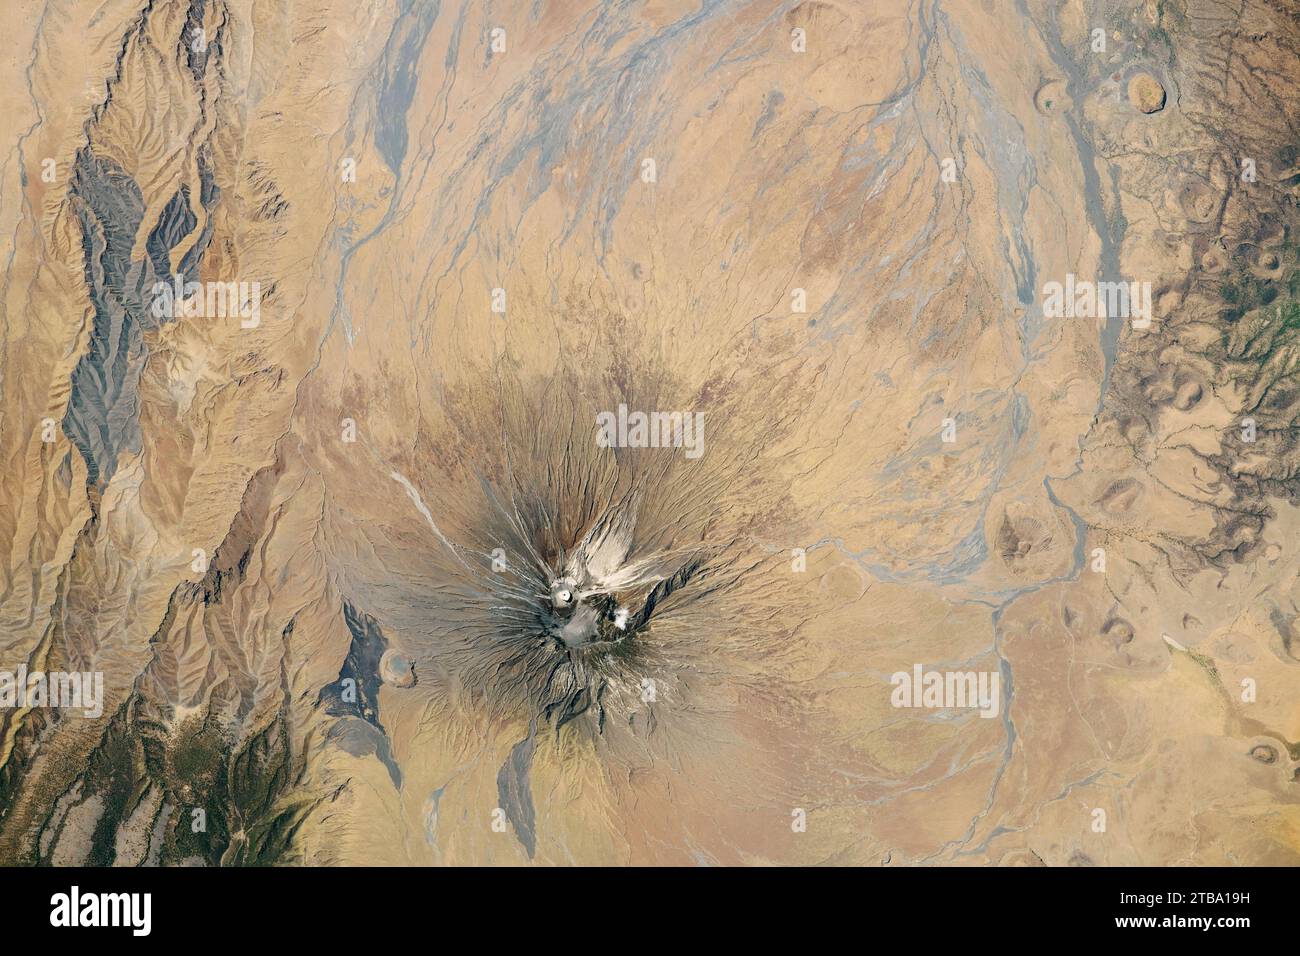 View from space of Ol Doinyo Lengai, a stratovolcano in Tanzania. Stock Photo